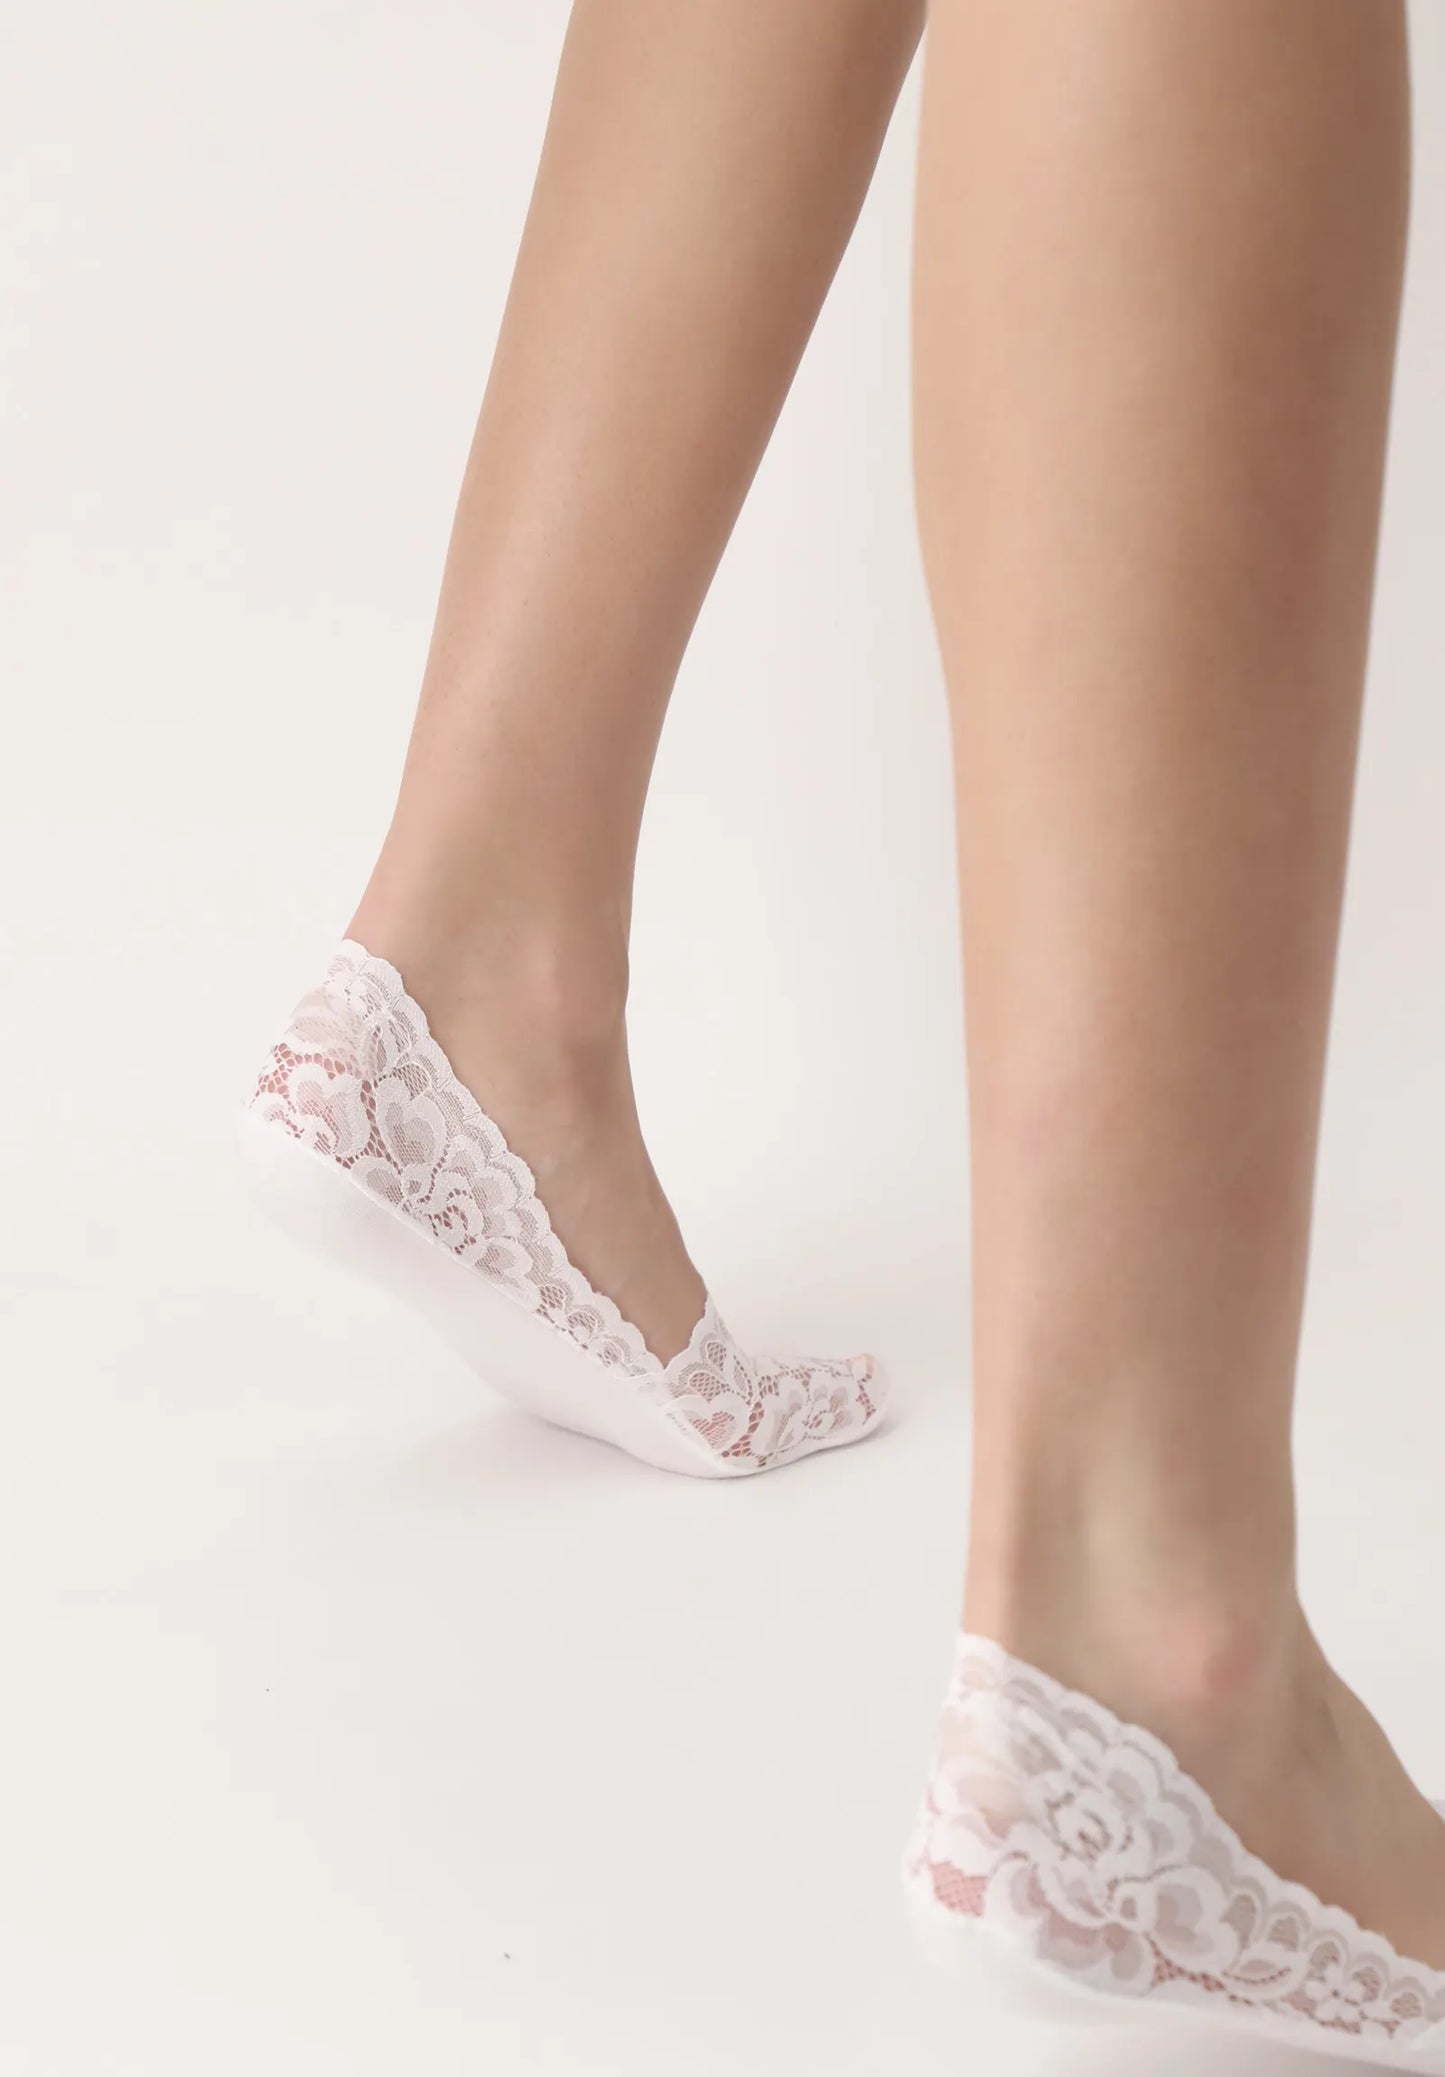 Oroblù Lacy No Show Socks - White floral lace invisible sock made of soft lace with breathable cotton sole and non-slip silicone grip on the heel.